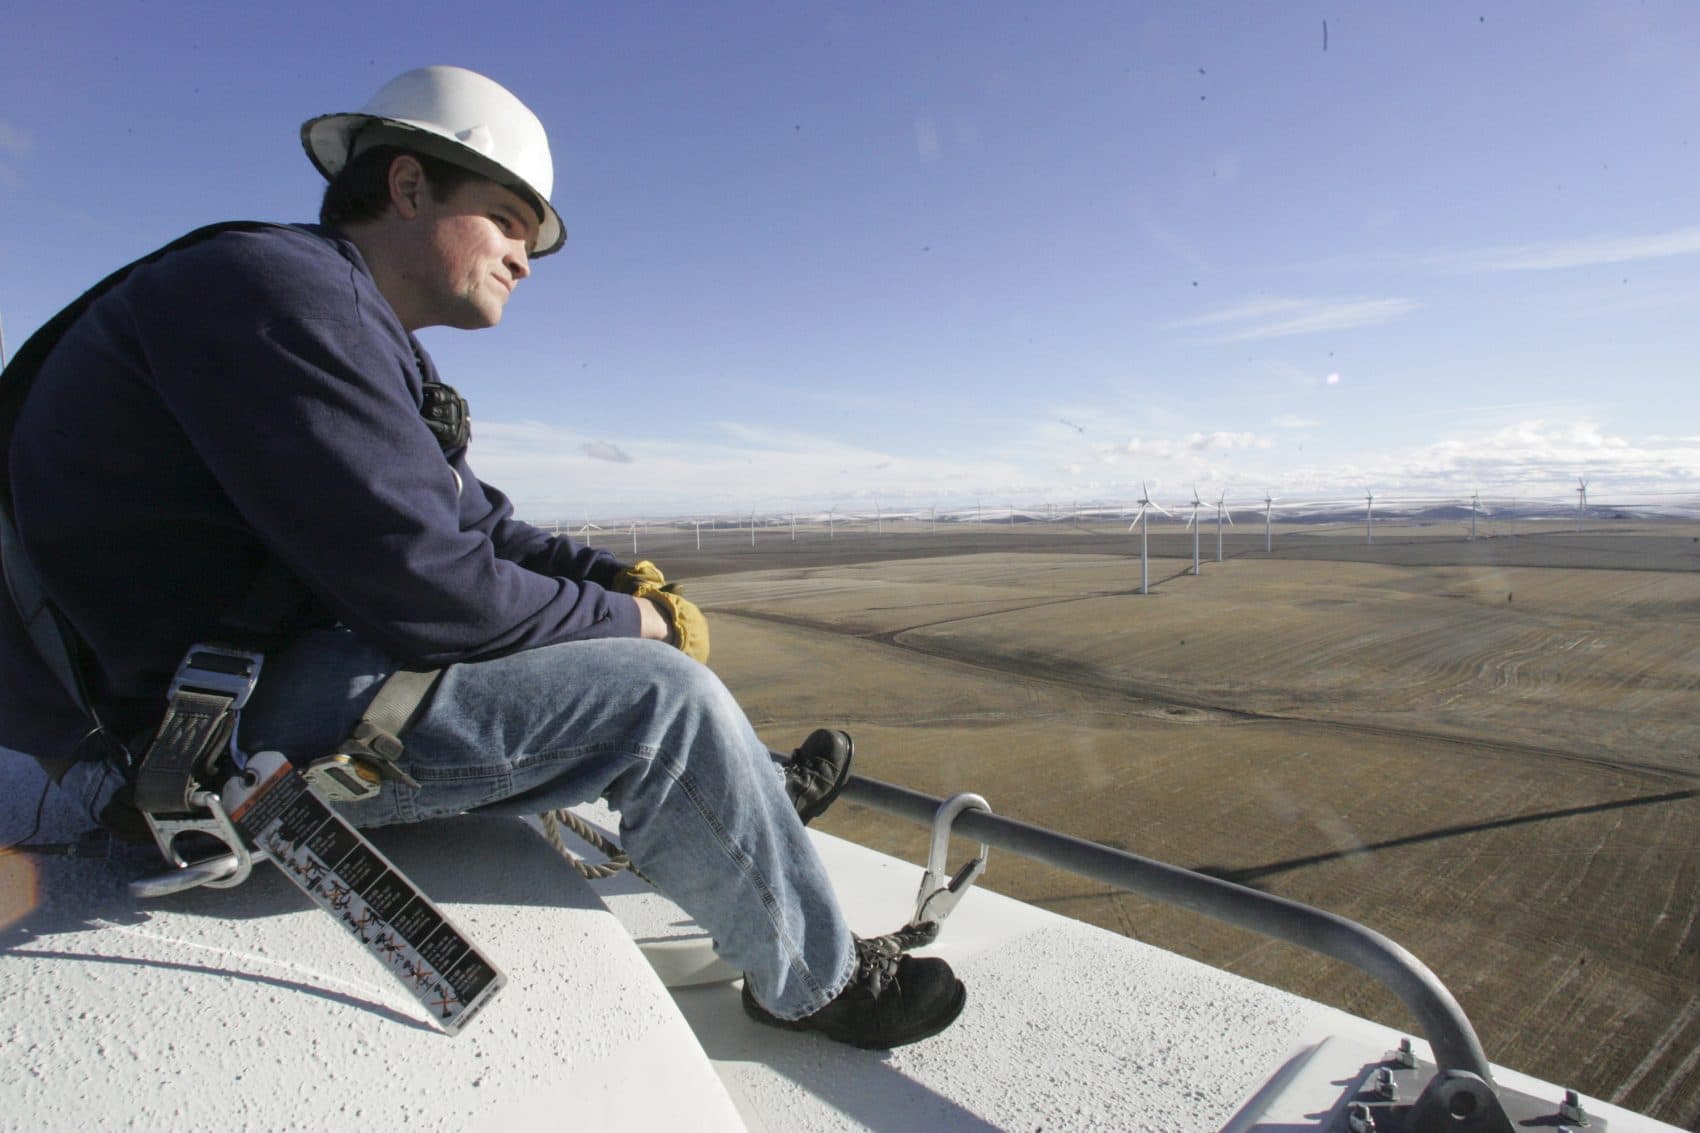 A wind plant supervisor looks over the landscape from the top of a wind turbine in January 2008 at a wind farm in Wasco, Ore. (Rick Bowmer/AP)